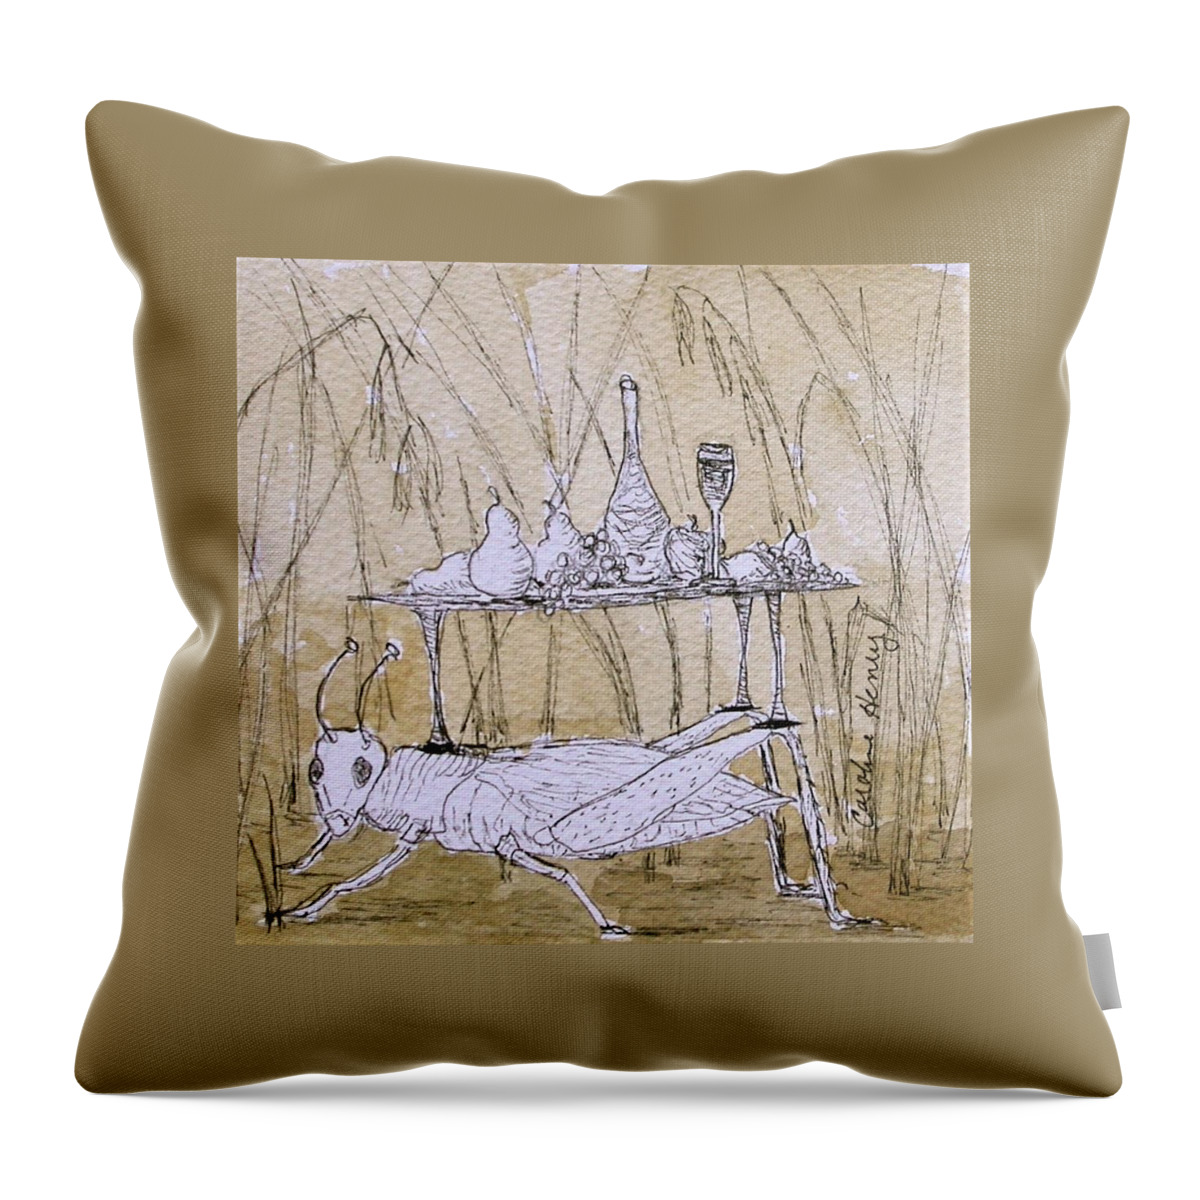 Surreal Throw Pillow featuring the drawing Grasshopper Picnic by Caroline Henry